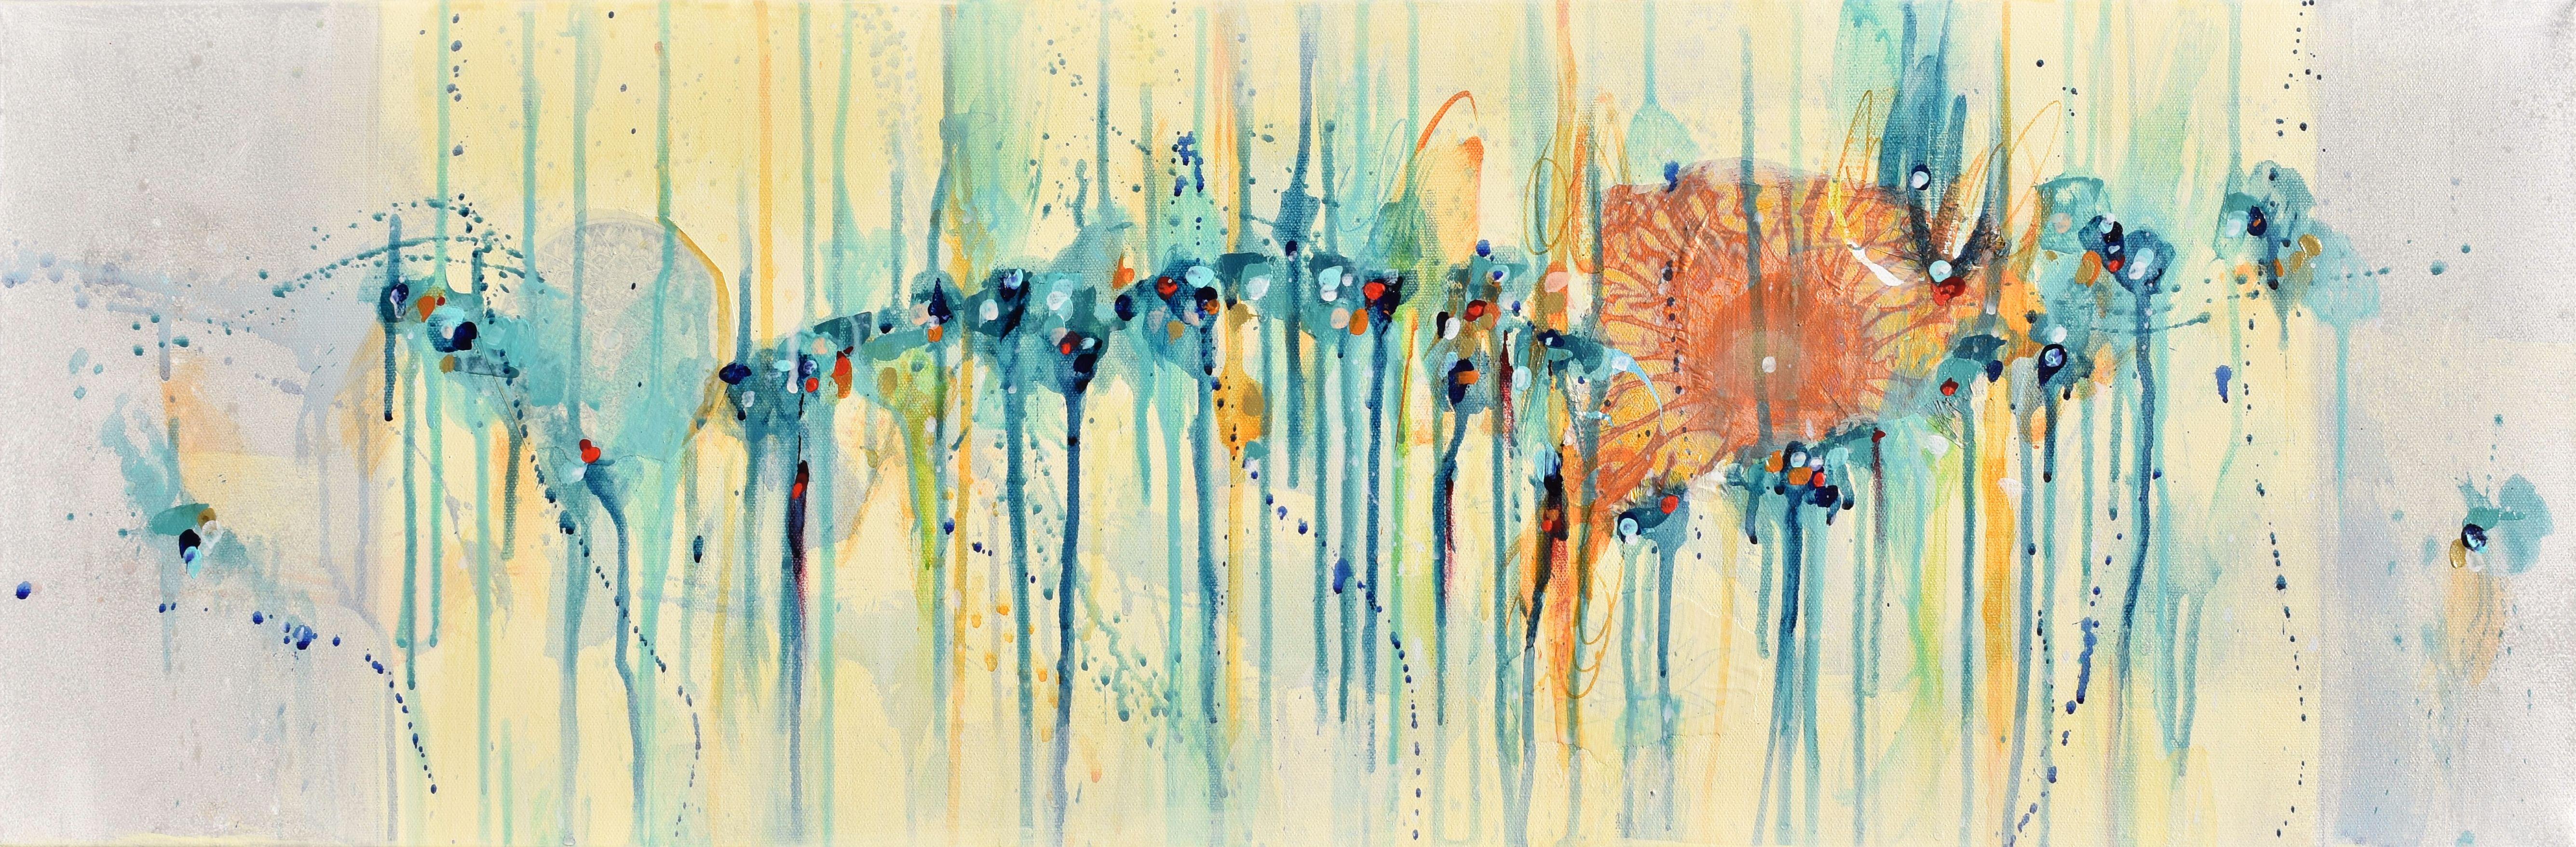 <p>Artist Comments<br>Artist Cynthia Ligeros displays a panoramic abstract of a moody winter twilight. Hues of blue and yellow glimmer throughout the composition. She draws inspiration from the profoundly alluring colors and feelings that emerge